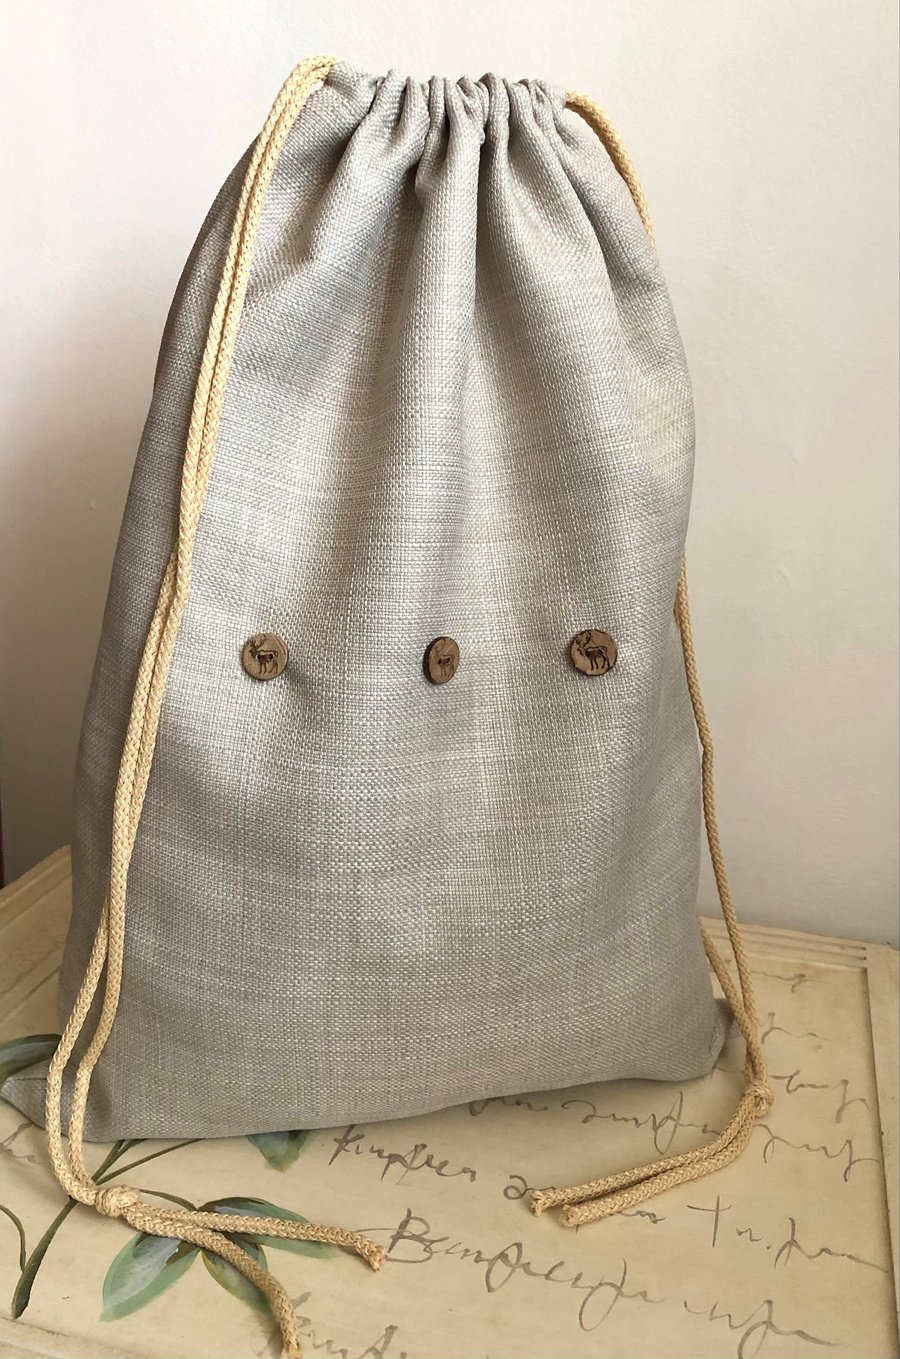 Strong drawstring bag in natural linen look fabric with cord.